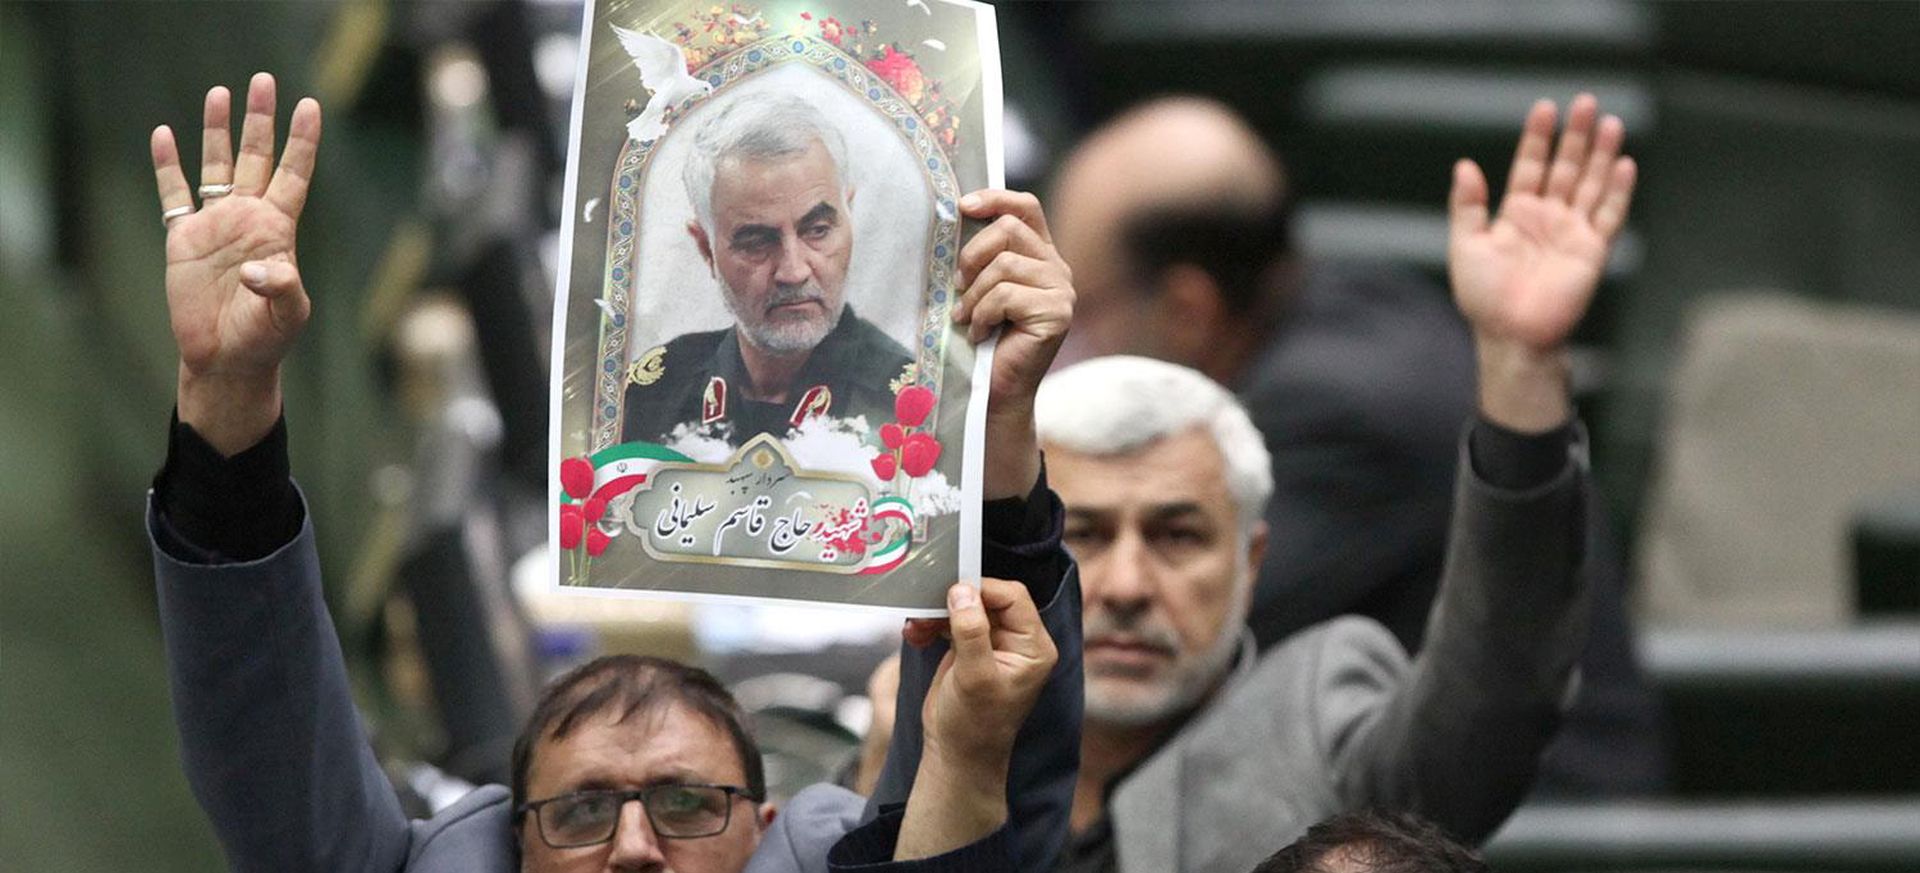 epa08109624 A handout photo made available by the Iranian Parliament officials news agency (ICANA) shows, Iranian lawmakers holding pictures of slain Iran's Quds Force leader Qasem Soleimani as they chant 'death to America', during a parliament session in Tehran, Iran, 07 January 2020. Media reported that Iranian Parliament vote on 07 January 2020, to put the members of the US department of defence 'Pentagon' and their relatives to the terrorist group list. Soleimani was killed in a targeted US airstrike on 03 January 2020 in Baghdad, Iraq.  EPA/ICANA HANDOUT  HANDOUT EDITORIAL USE ONLY/NO SALES